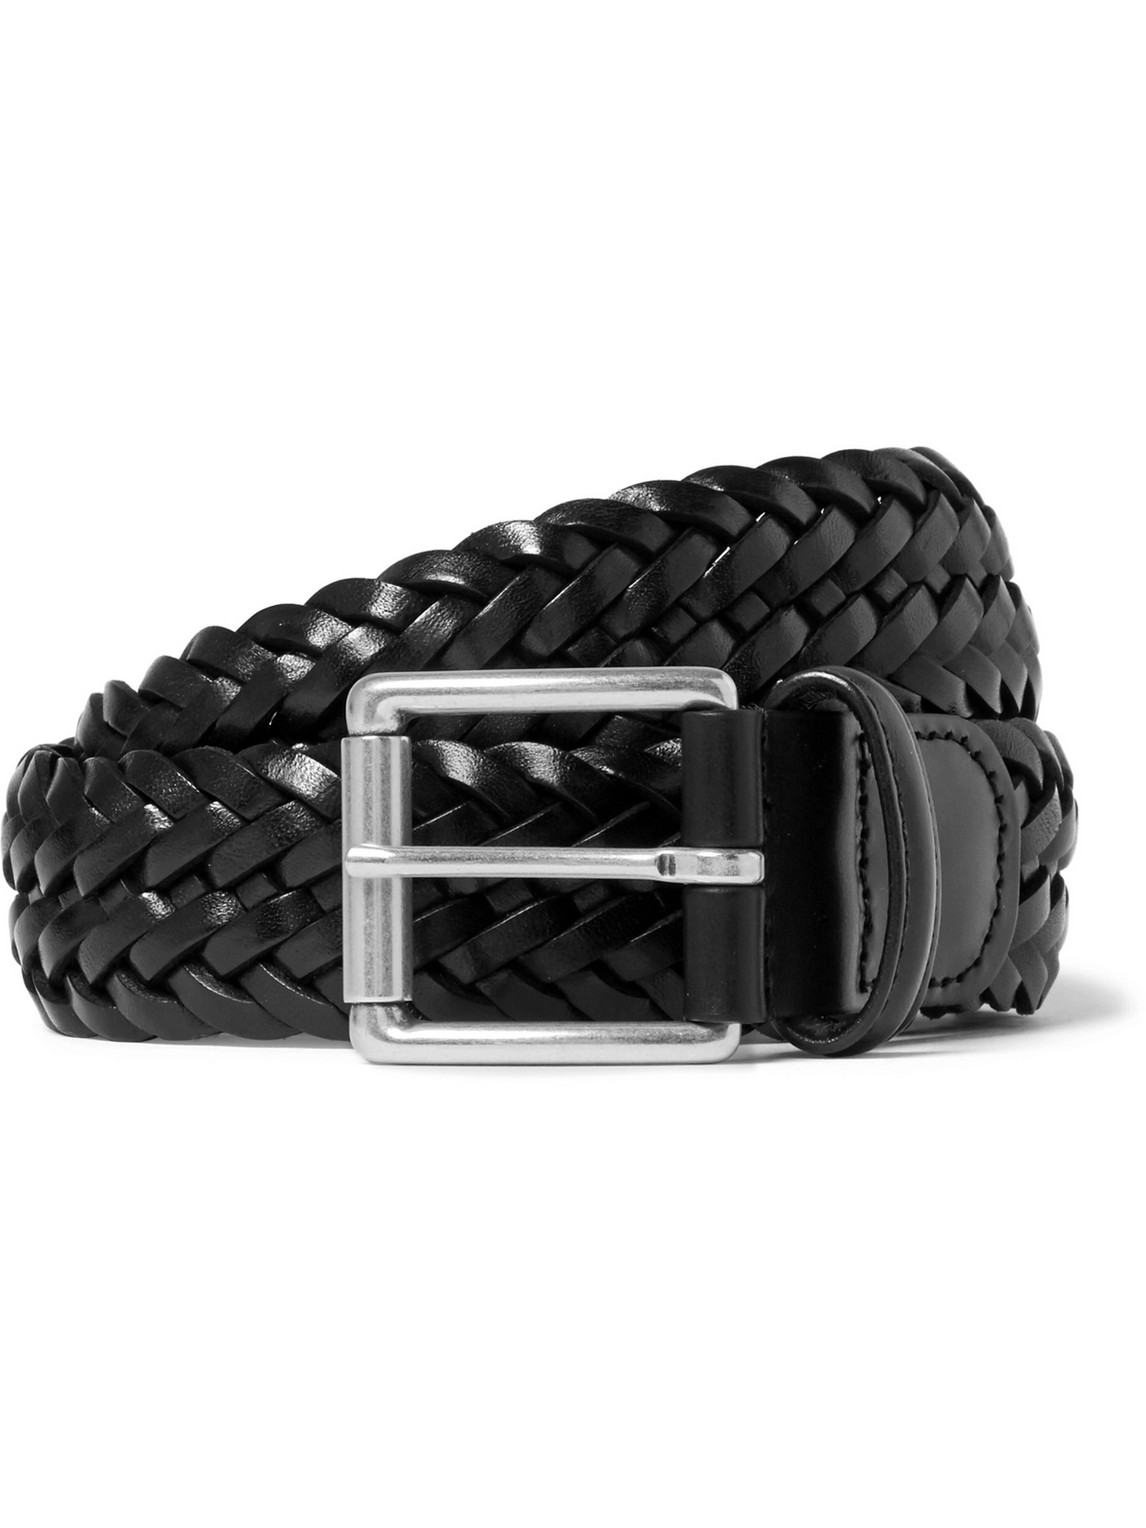 Anderson's 3.5cm Woven Leather Belt In Black